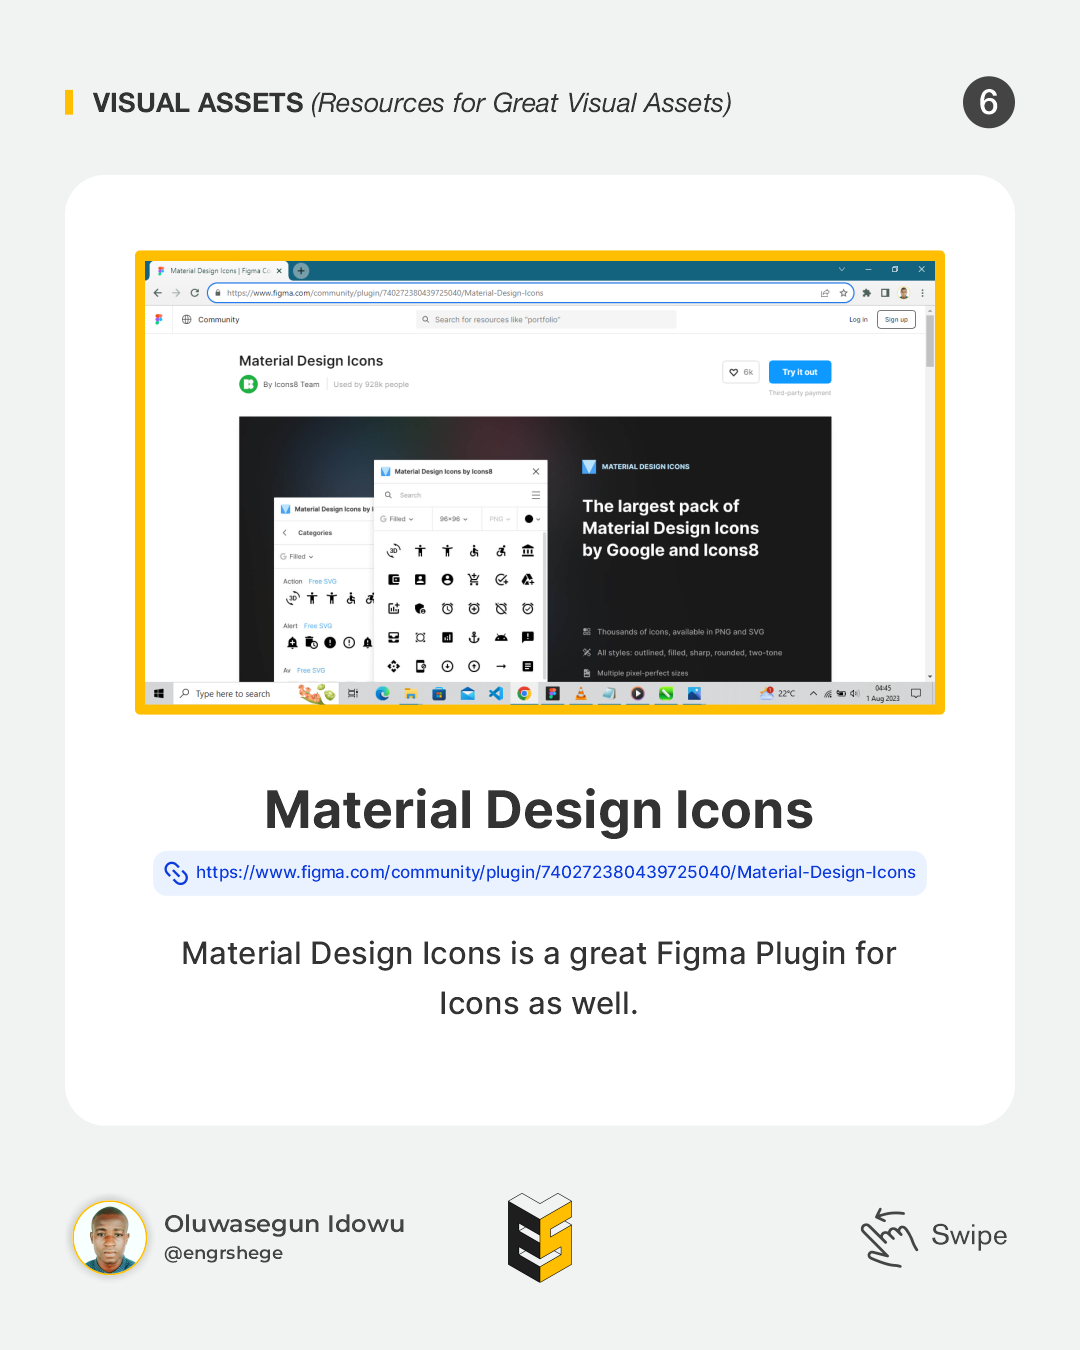 Resources for Icons: Material Design Icons